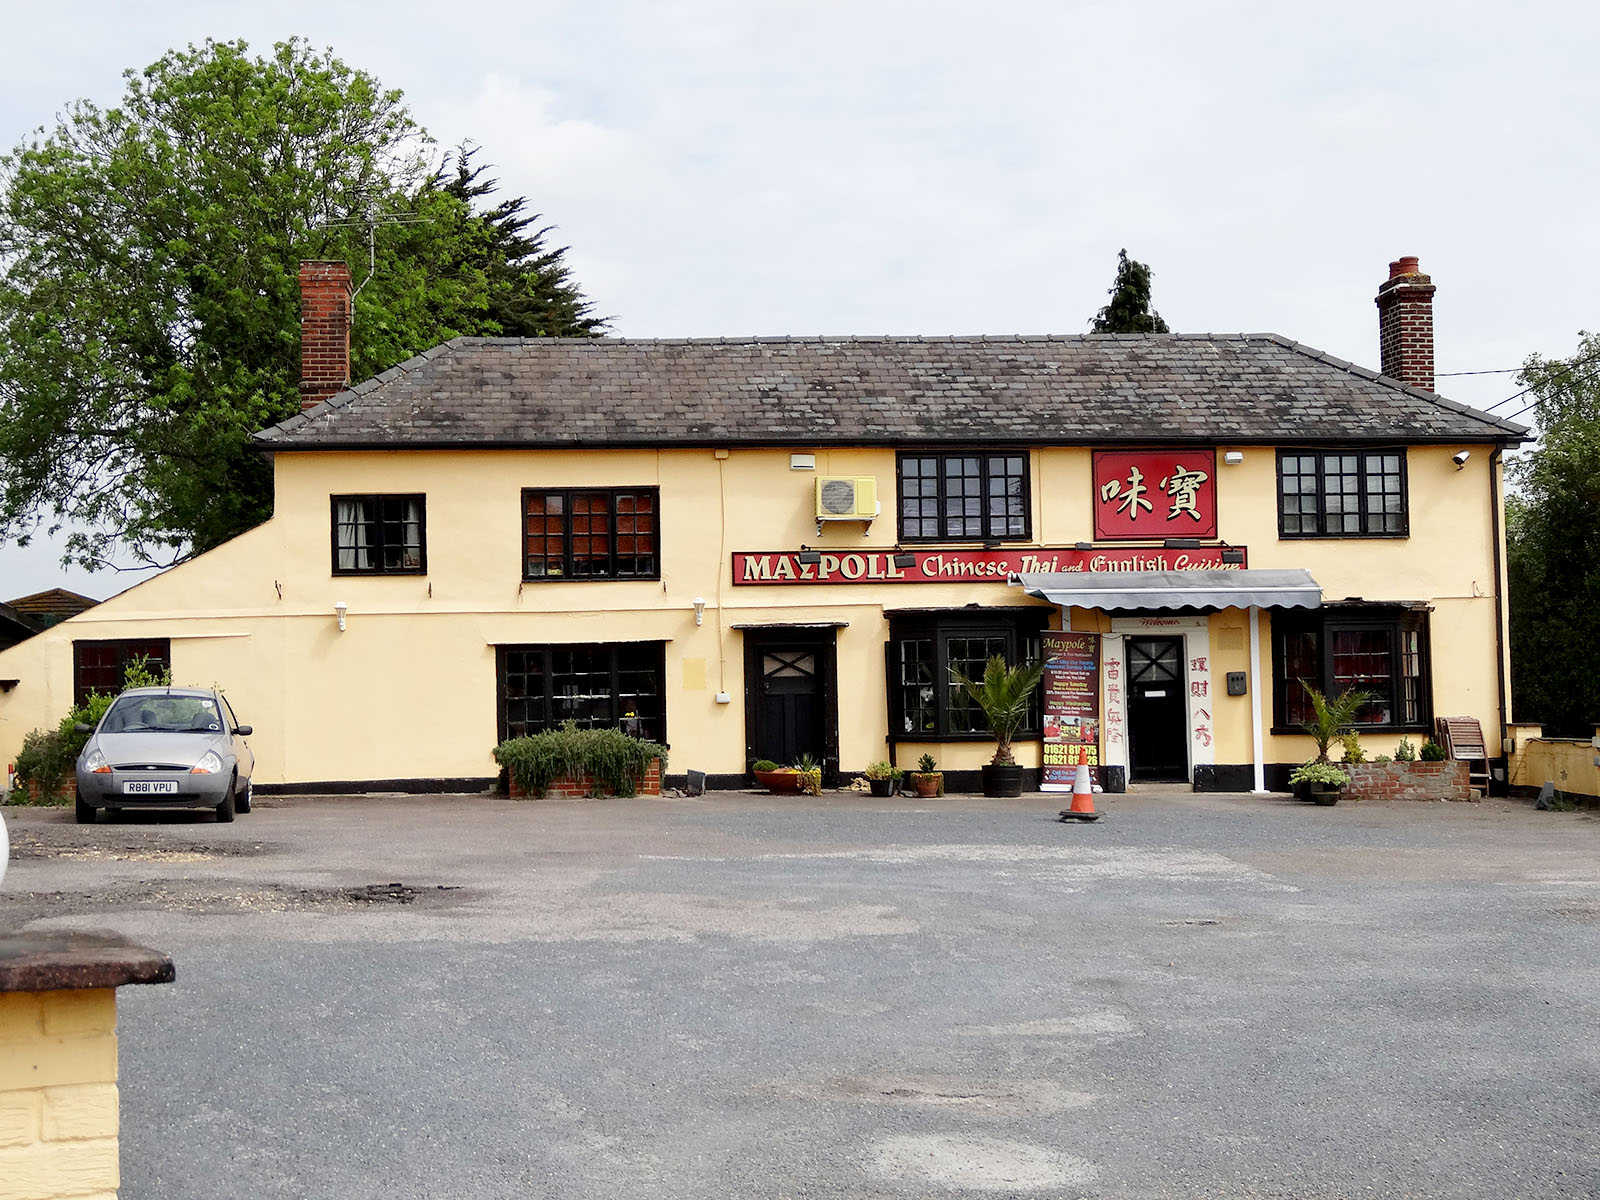 An image of The Maypole Restaurant